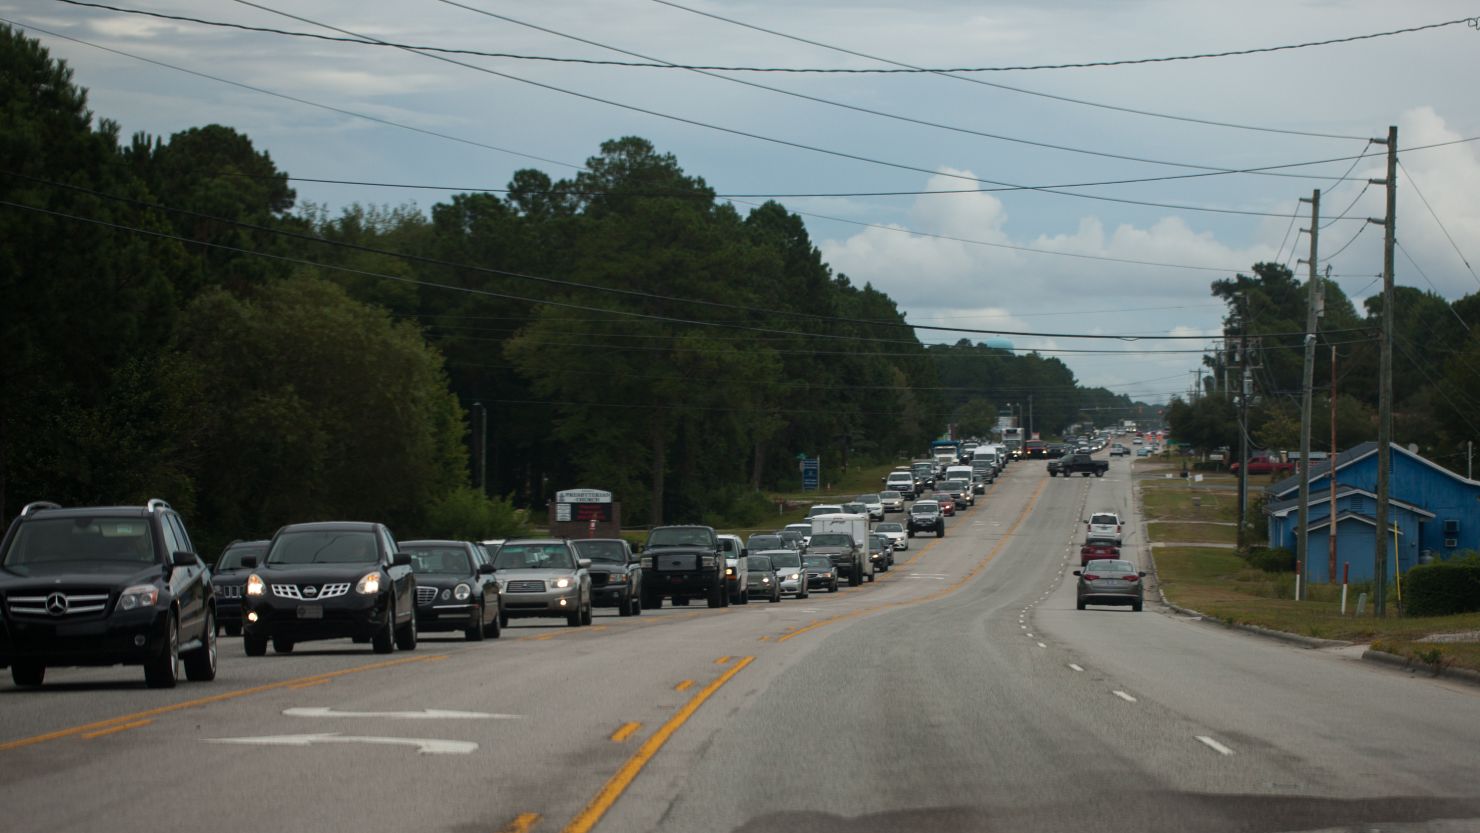 Vehicles line up along State Route 17 in Hampstead, North Carolina, as people evacuate the coast on September 11, 2018.